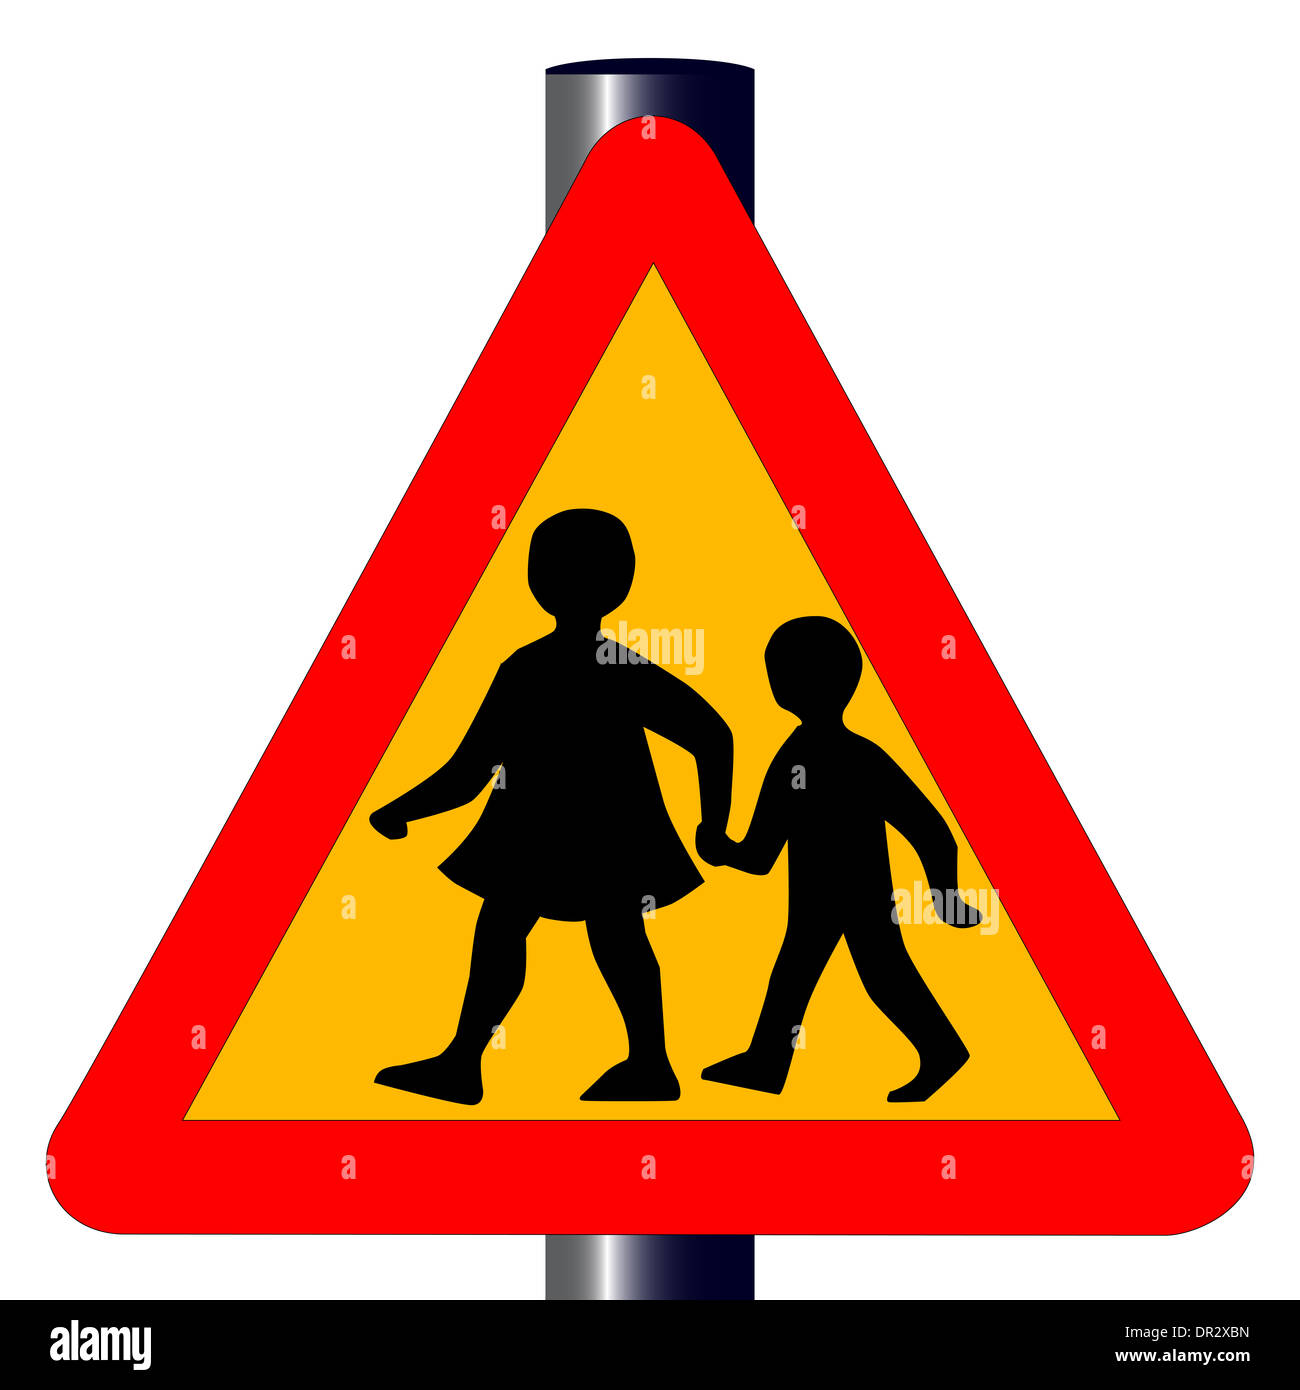 The traditional amber 'children crossing' traffic sign isolated on a white background.. Stock Photo